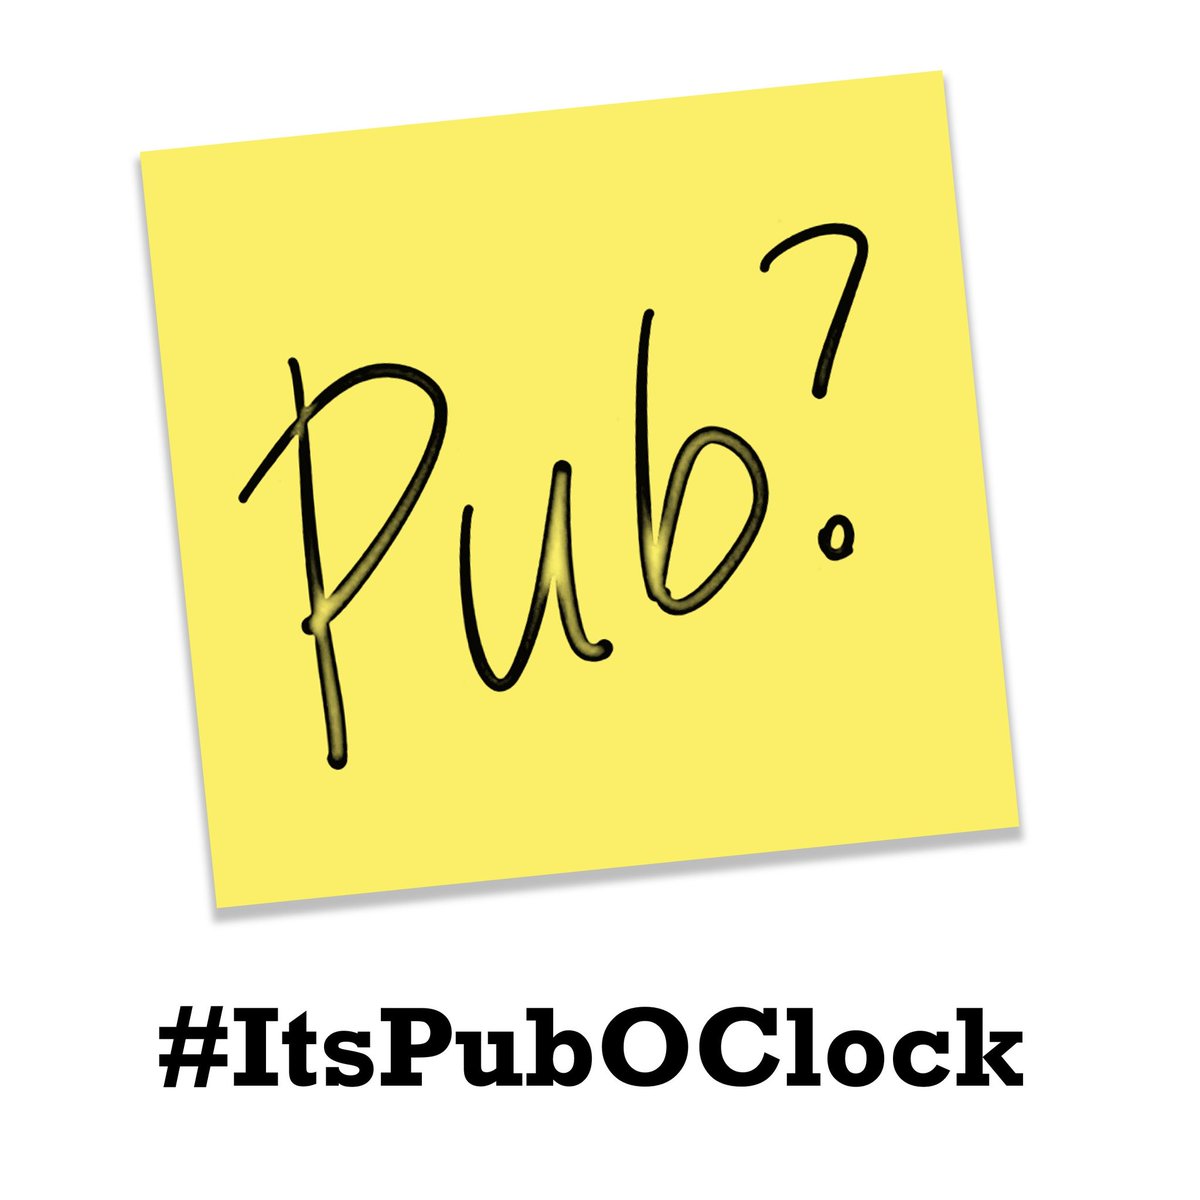 May #ItsPubOClock dates:

Thursday 16th @GreenGoddessPub 
Thursday 23rd @RustyBucketPub 

6.30pm onwards. Pop in or stay all evening. Come alone or bring a friend. Chat shit about snacks and beyond, meet new folks and catch up with those you've met before.